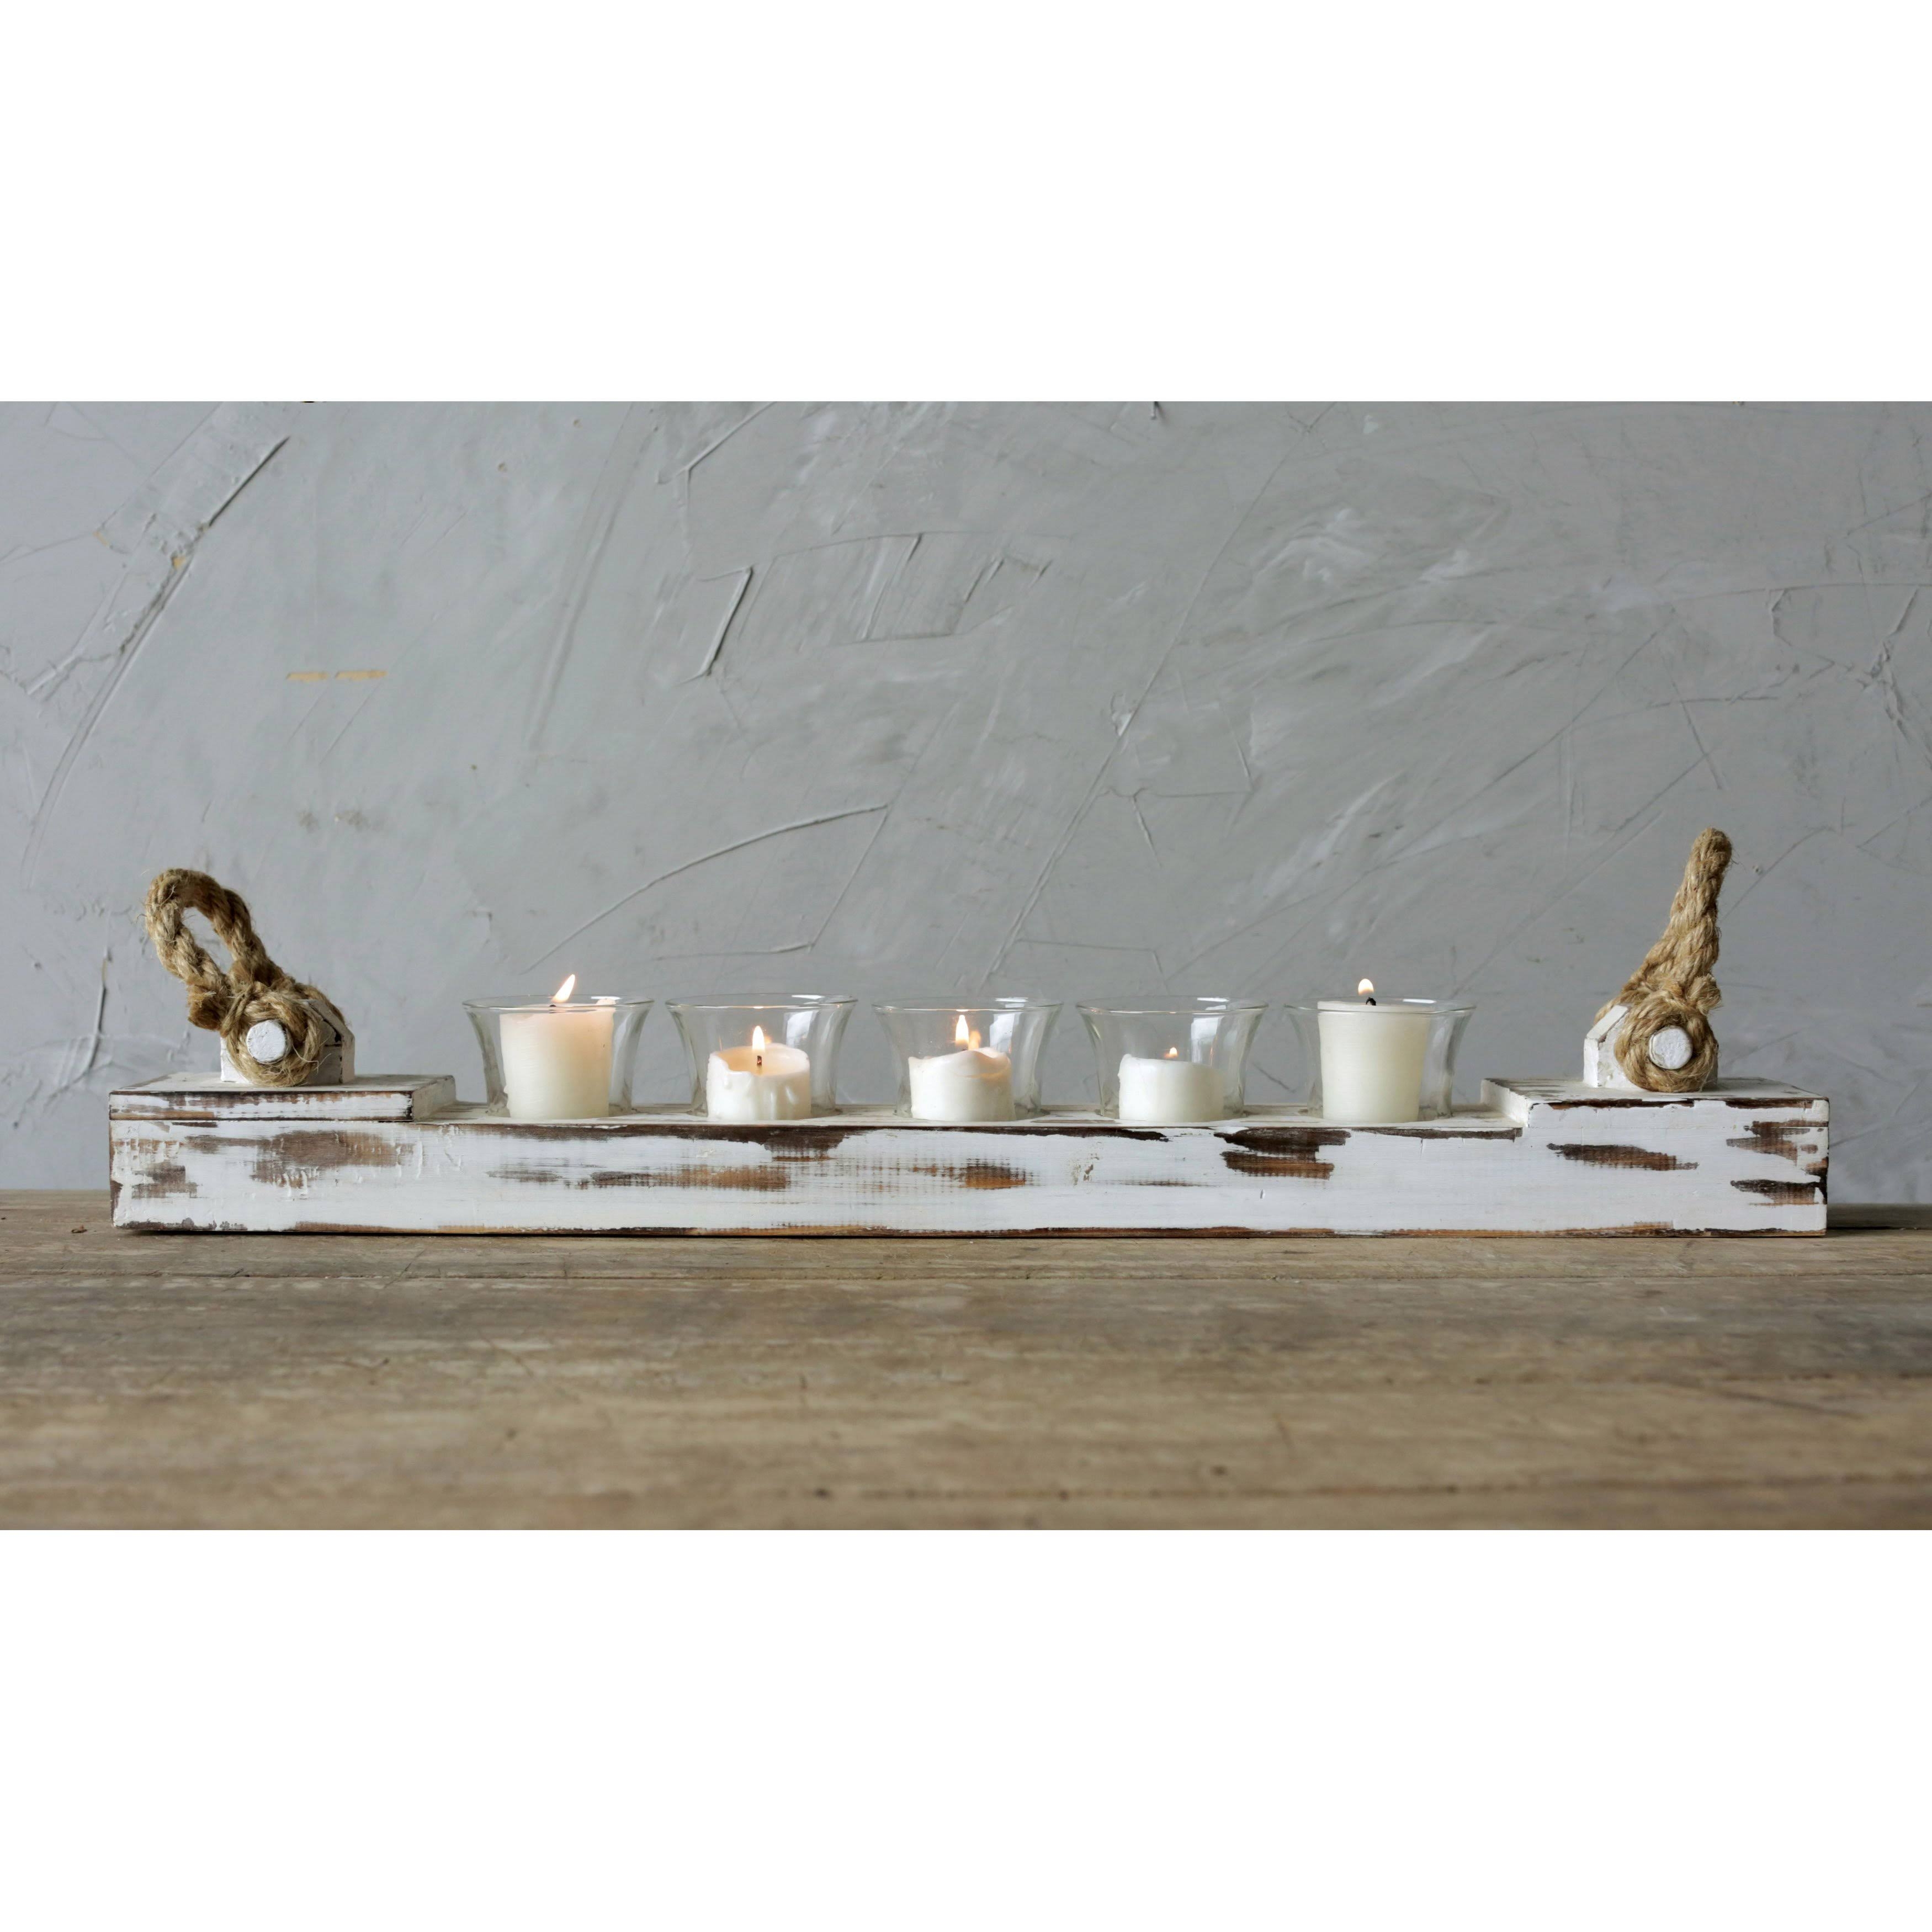 Distressed White Wood Votive Holder with 5 Glass Inserts - Image 2